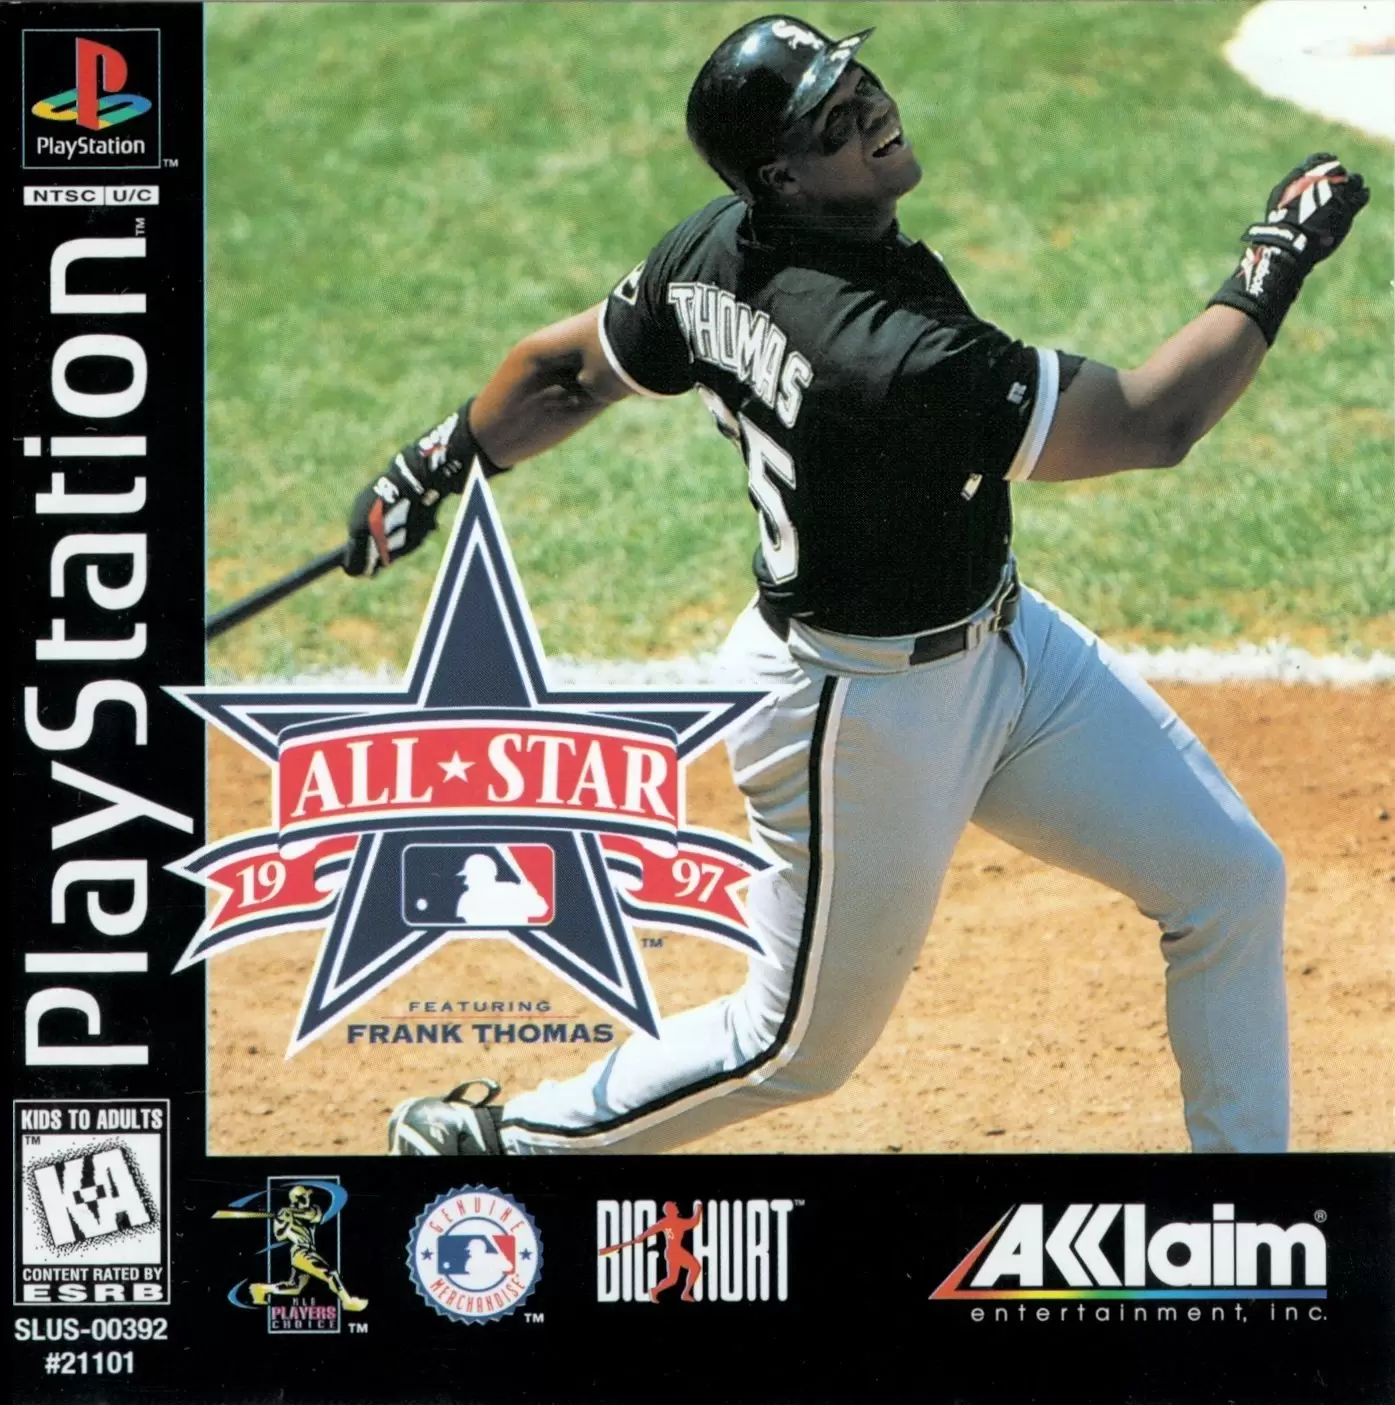 Playstation games - All-Star 1997 Featuring Frank Thomas